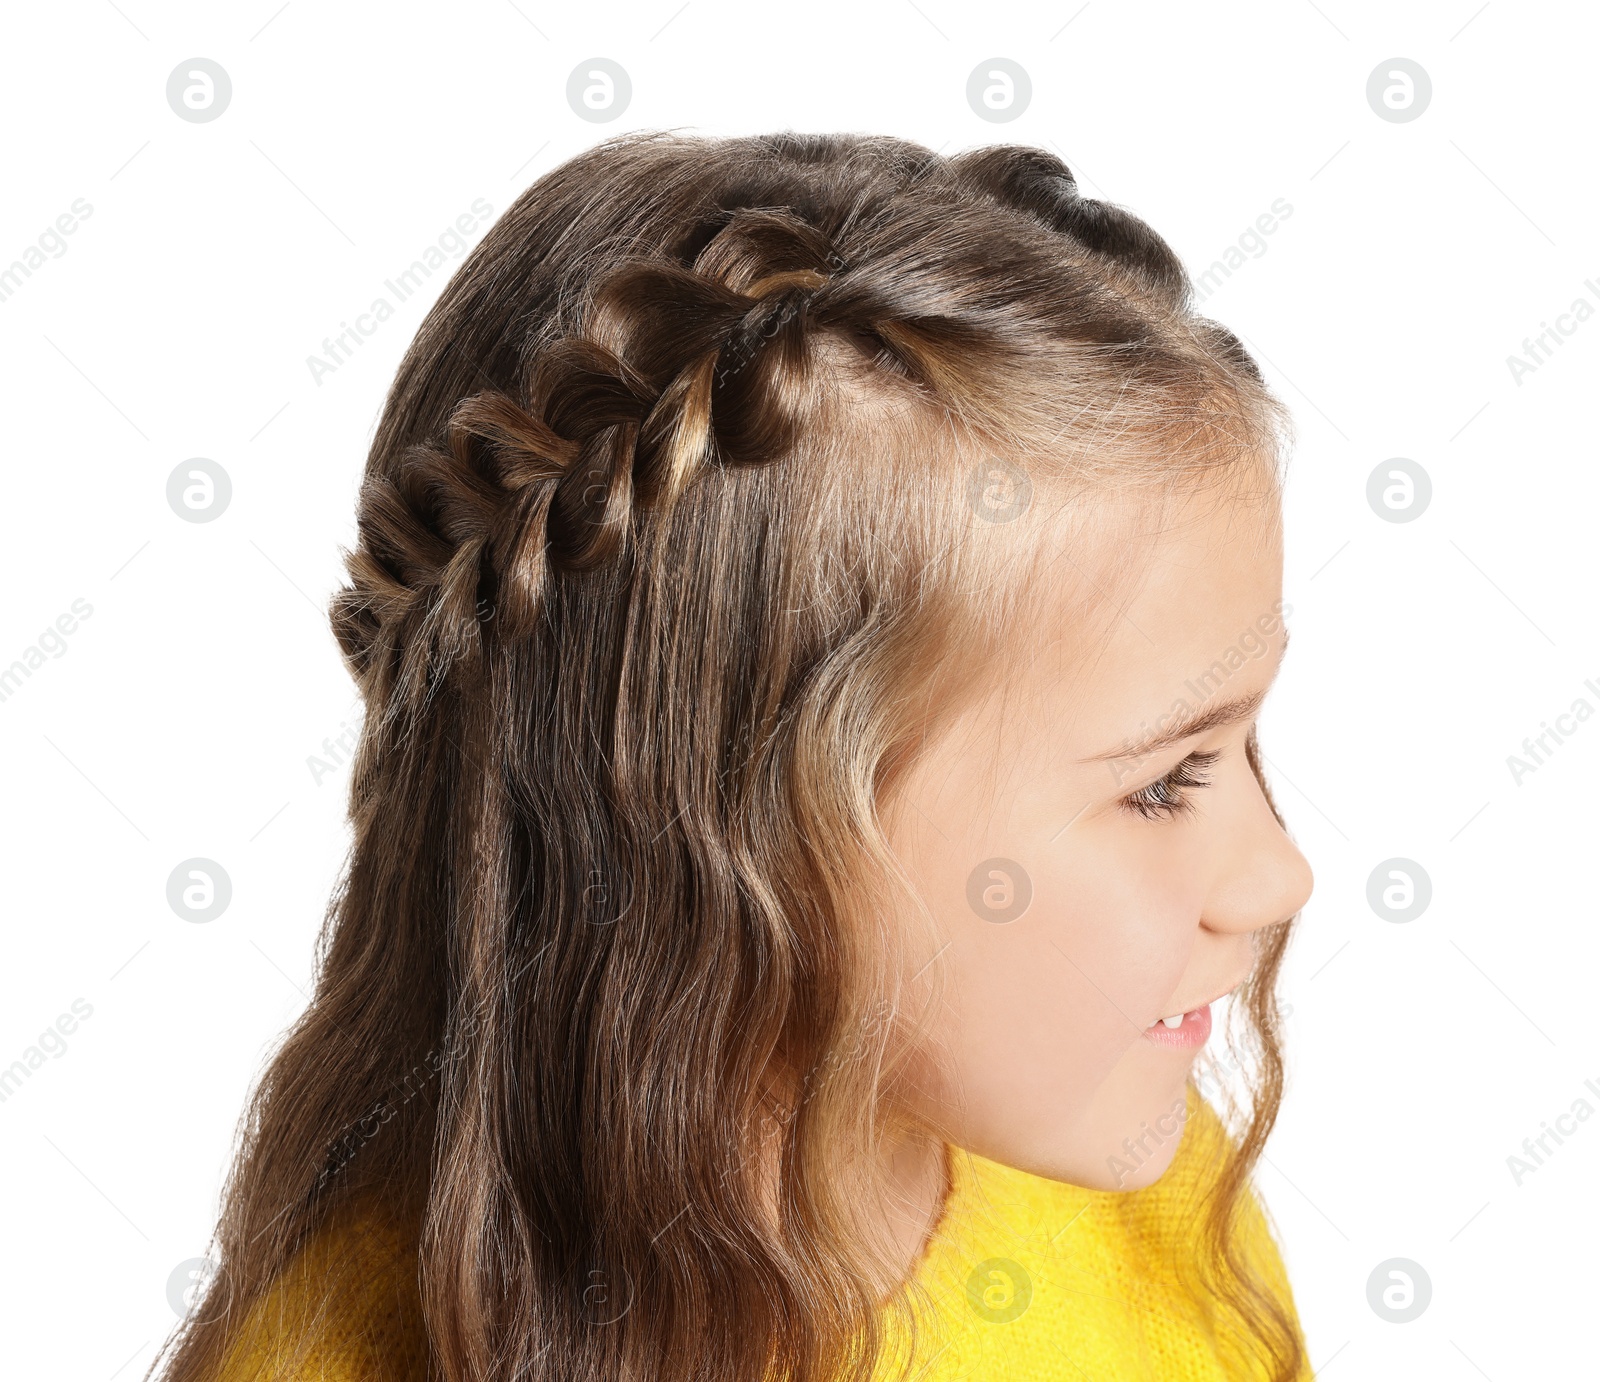 Photo of Cute little girl with braided hair on white background